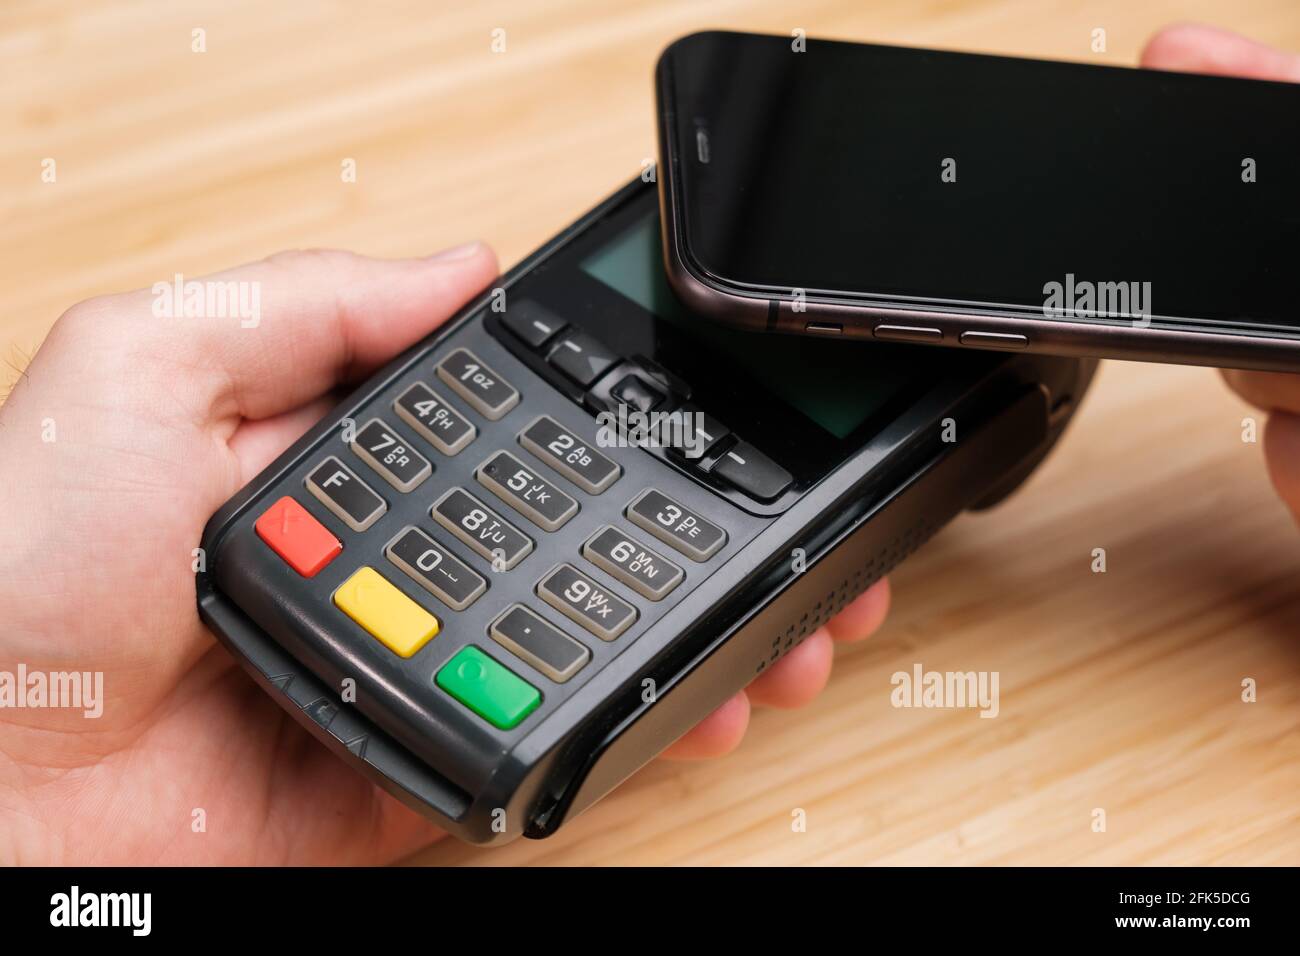 Man uses wireless terminal contactless payment with smartphone Stock Photo